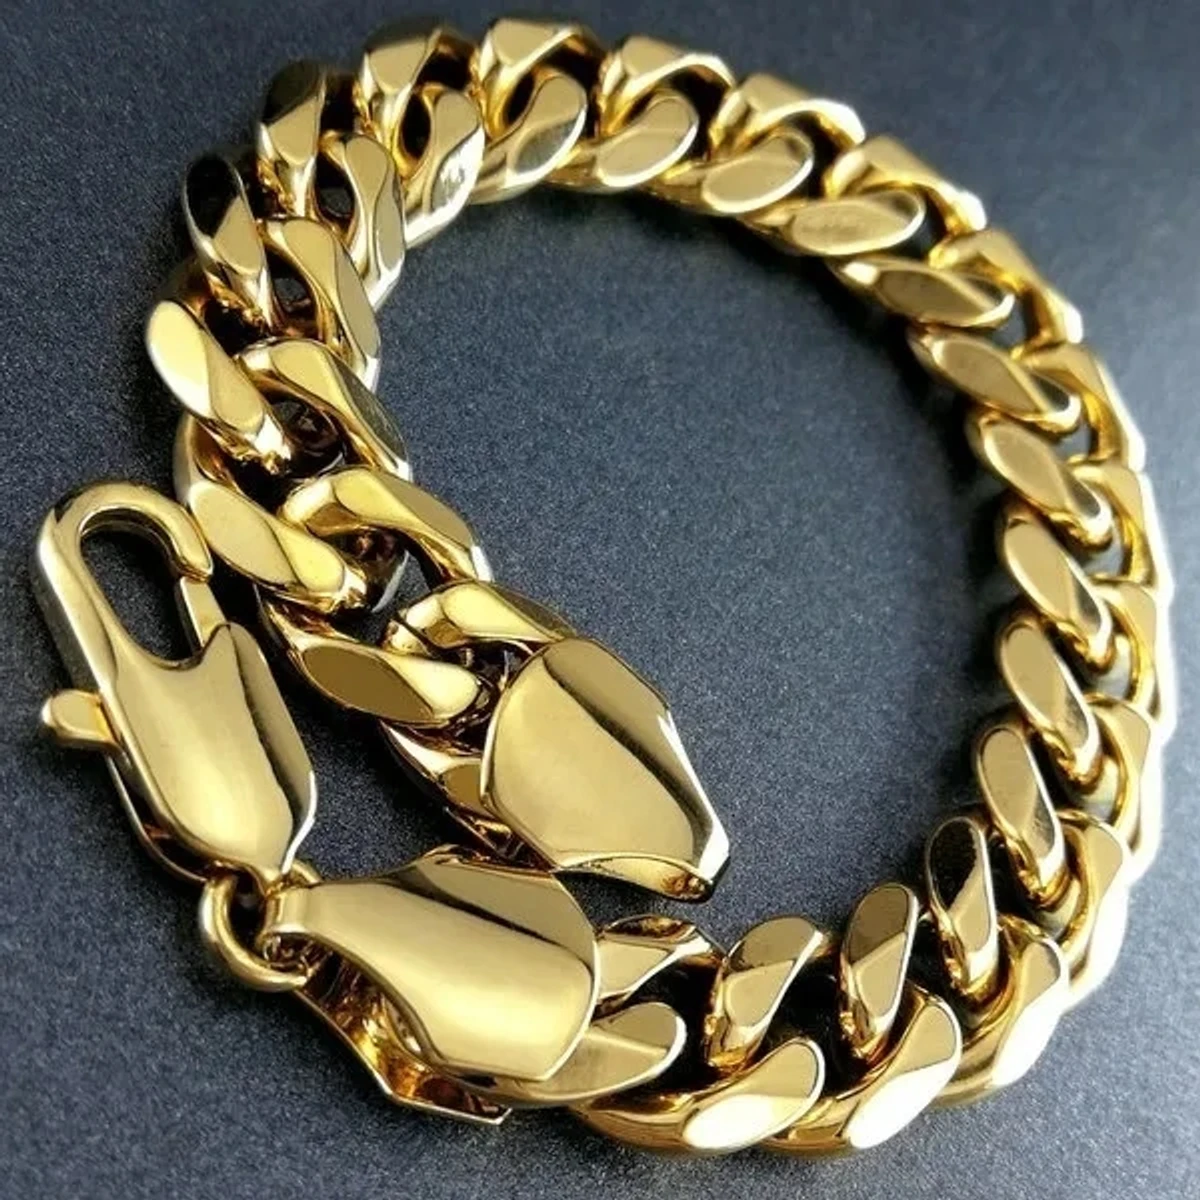 Fashion Charming Simple Gold New Chain Bracelets